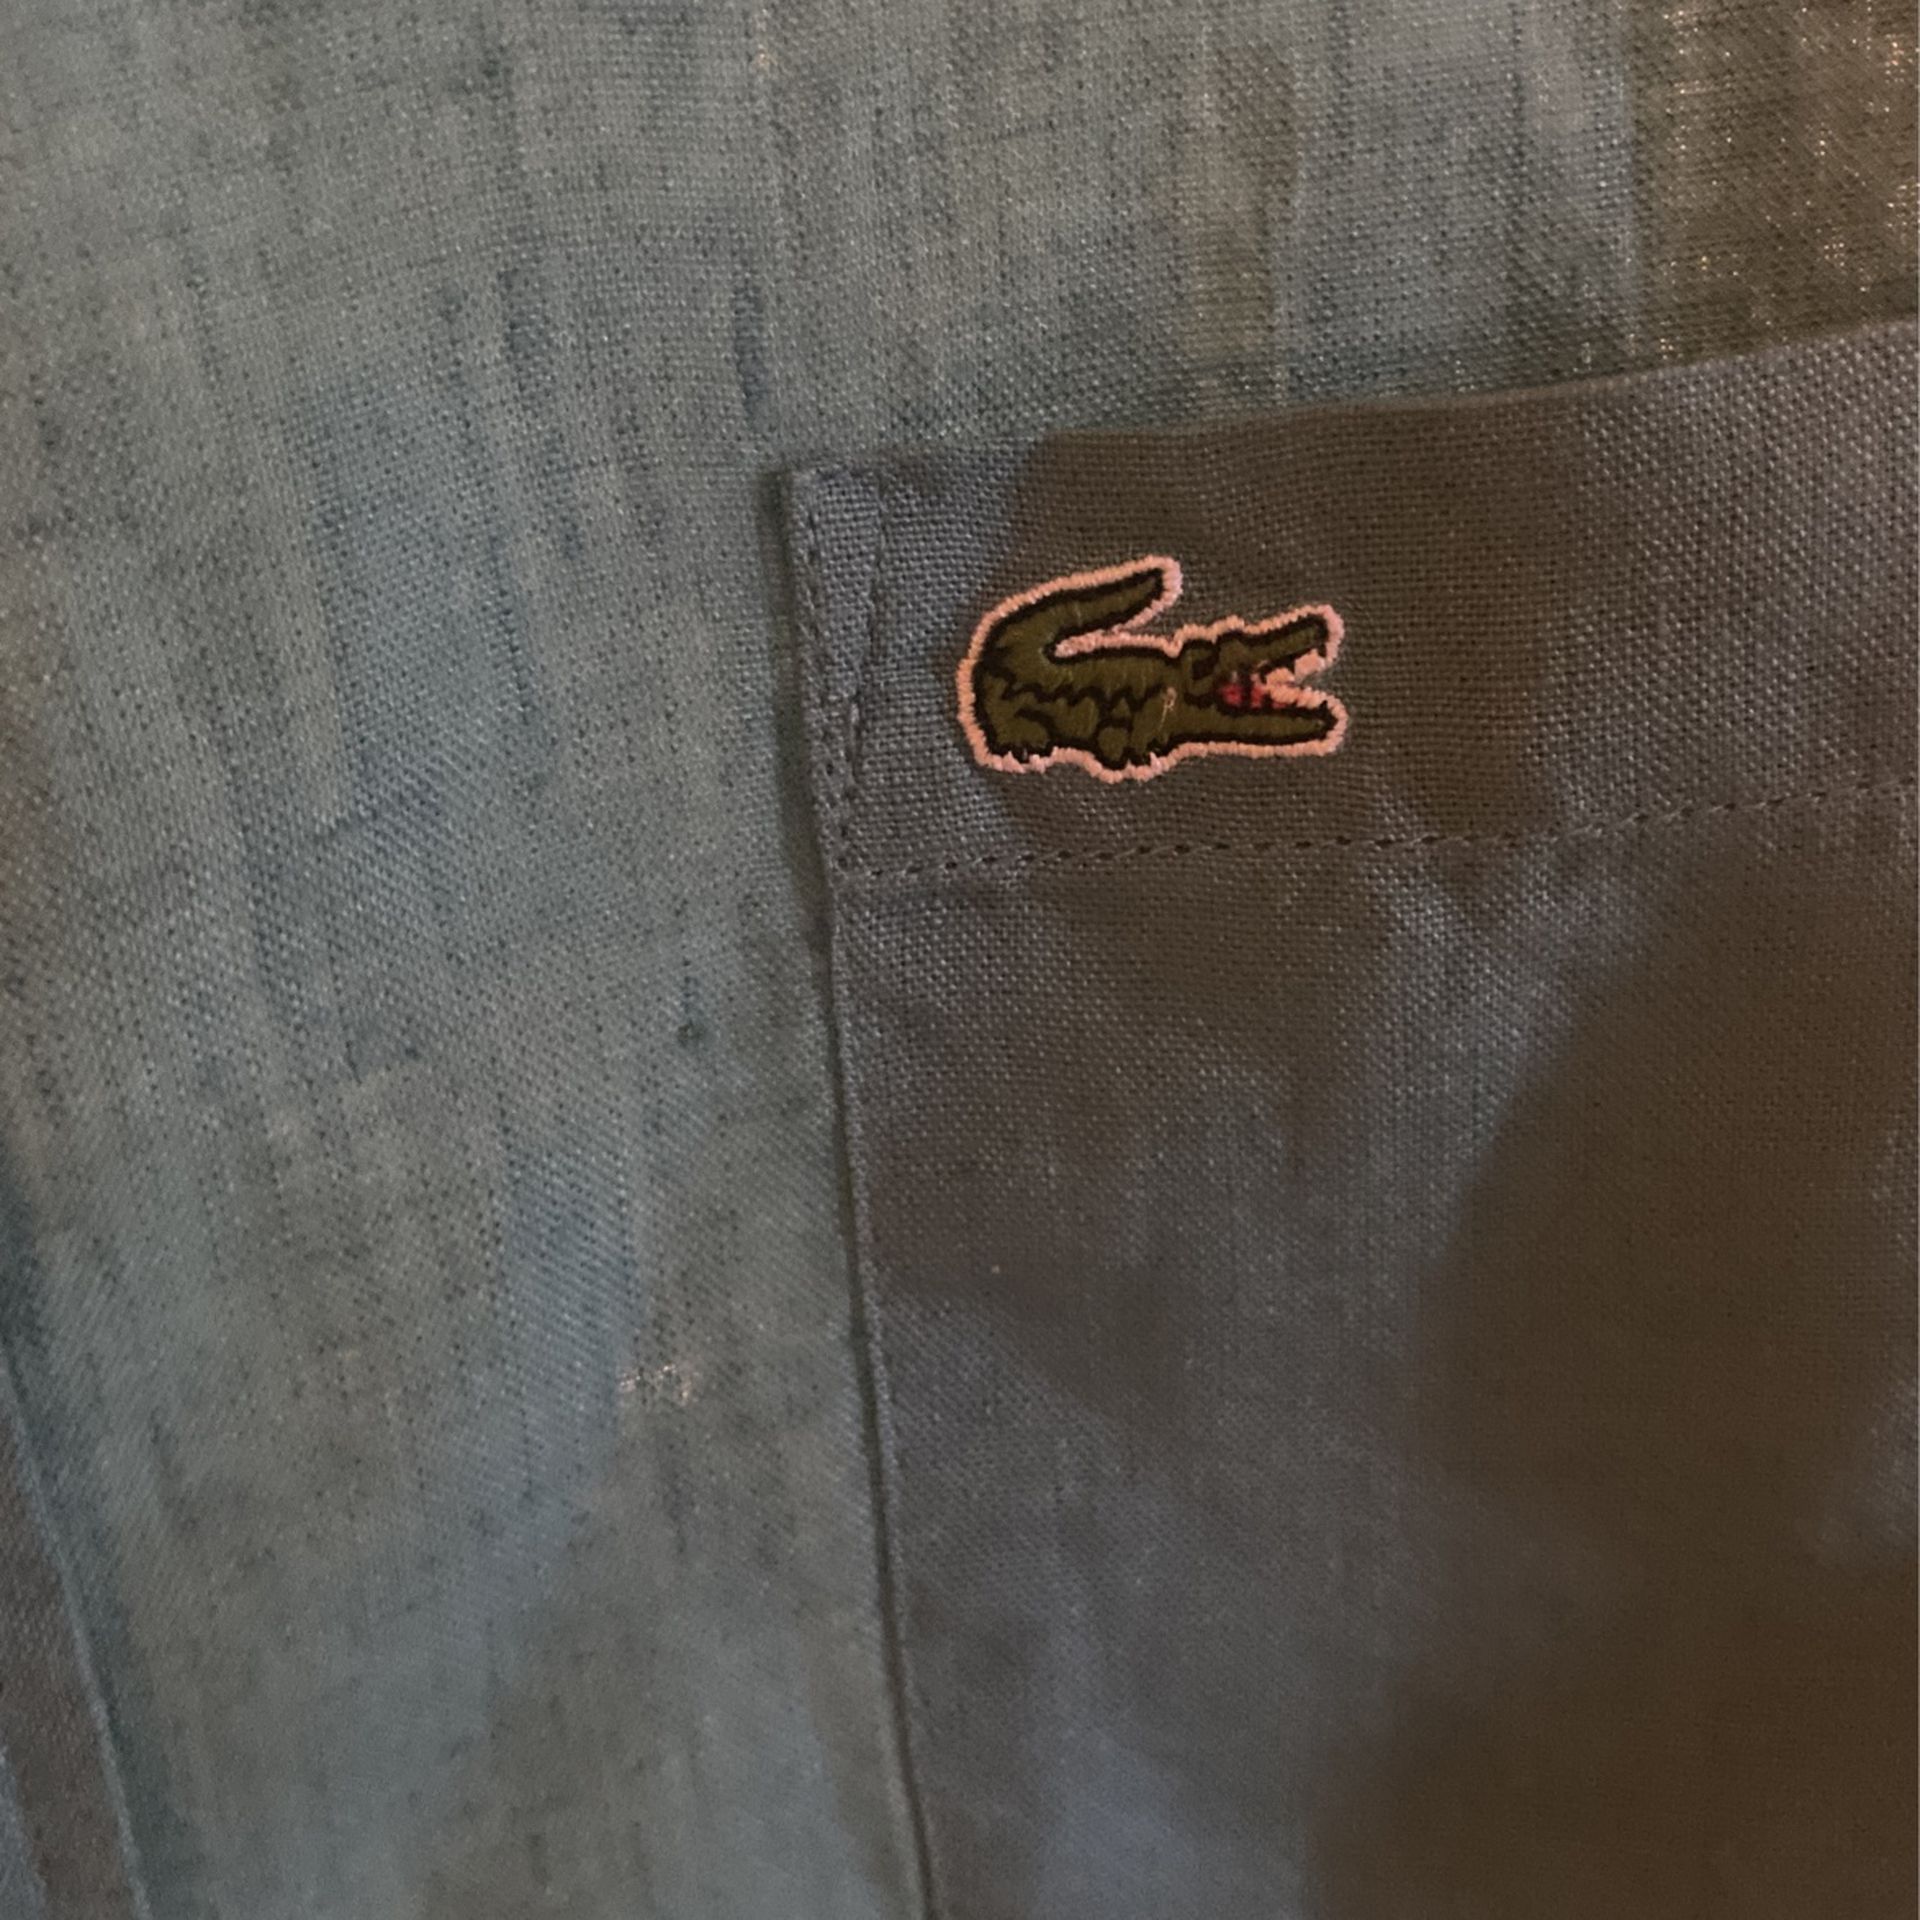 afgunst Verminderen geur Lacoste long Slave Shirt Size Medium New One From Lacoste Store real price  $ 145.00 let go For $70 Whit Tag for Sale in Bell Gardens, CA - OfferUp